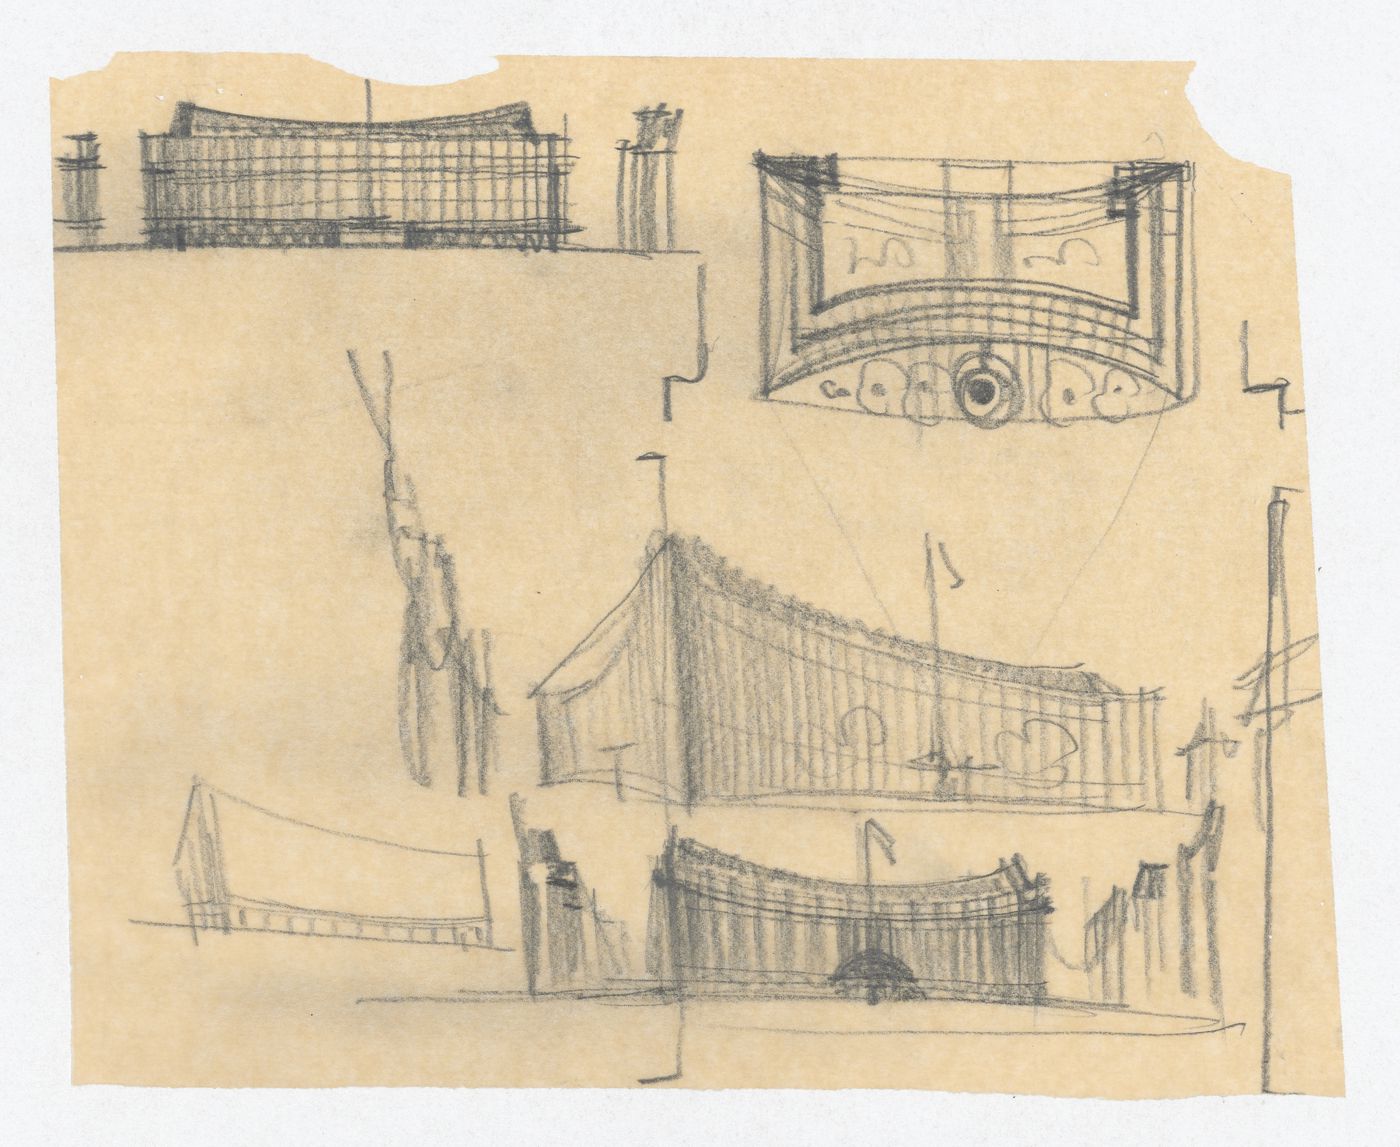 Sketched elevation, plan and perspectives, United States Chancellery Building, London, England